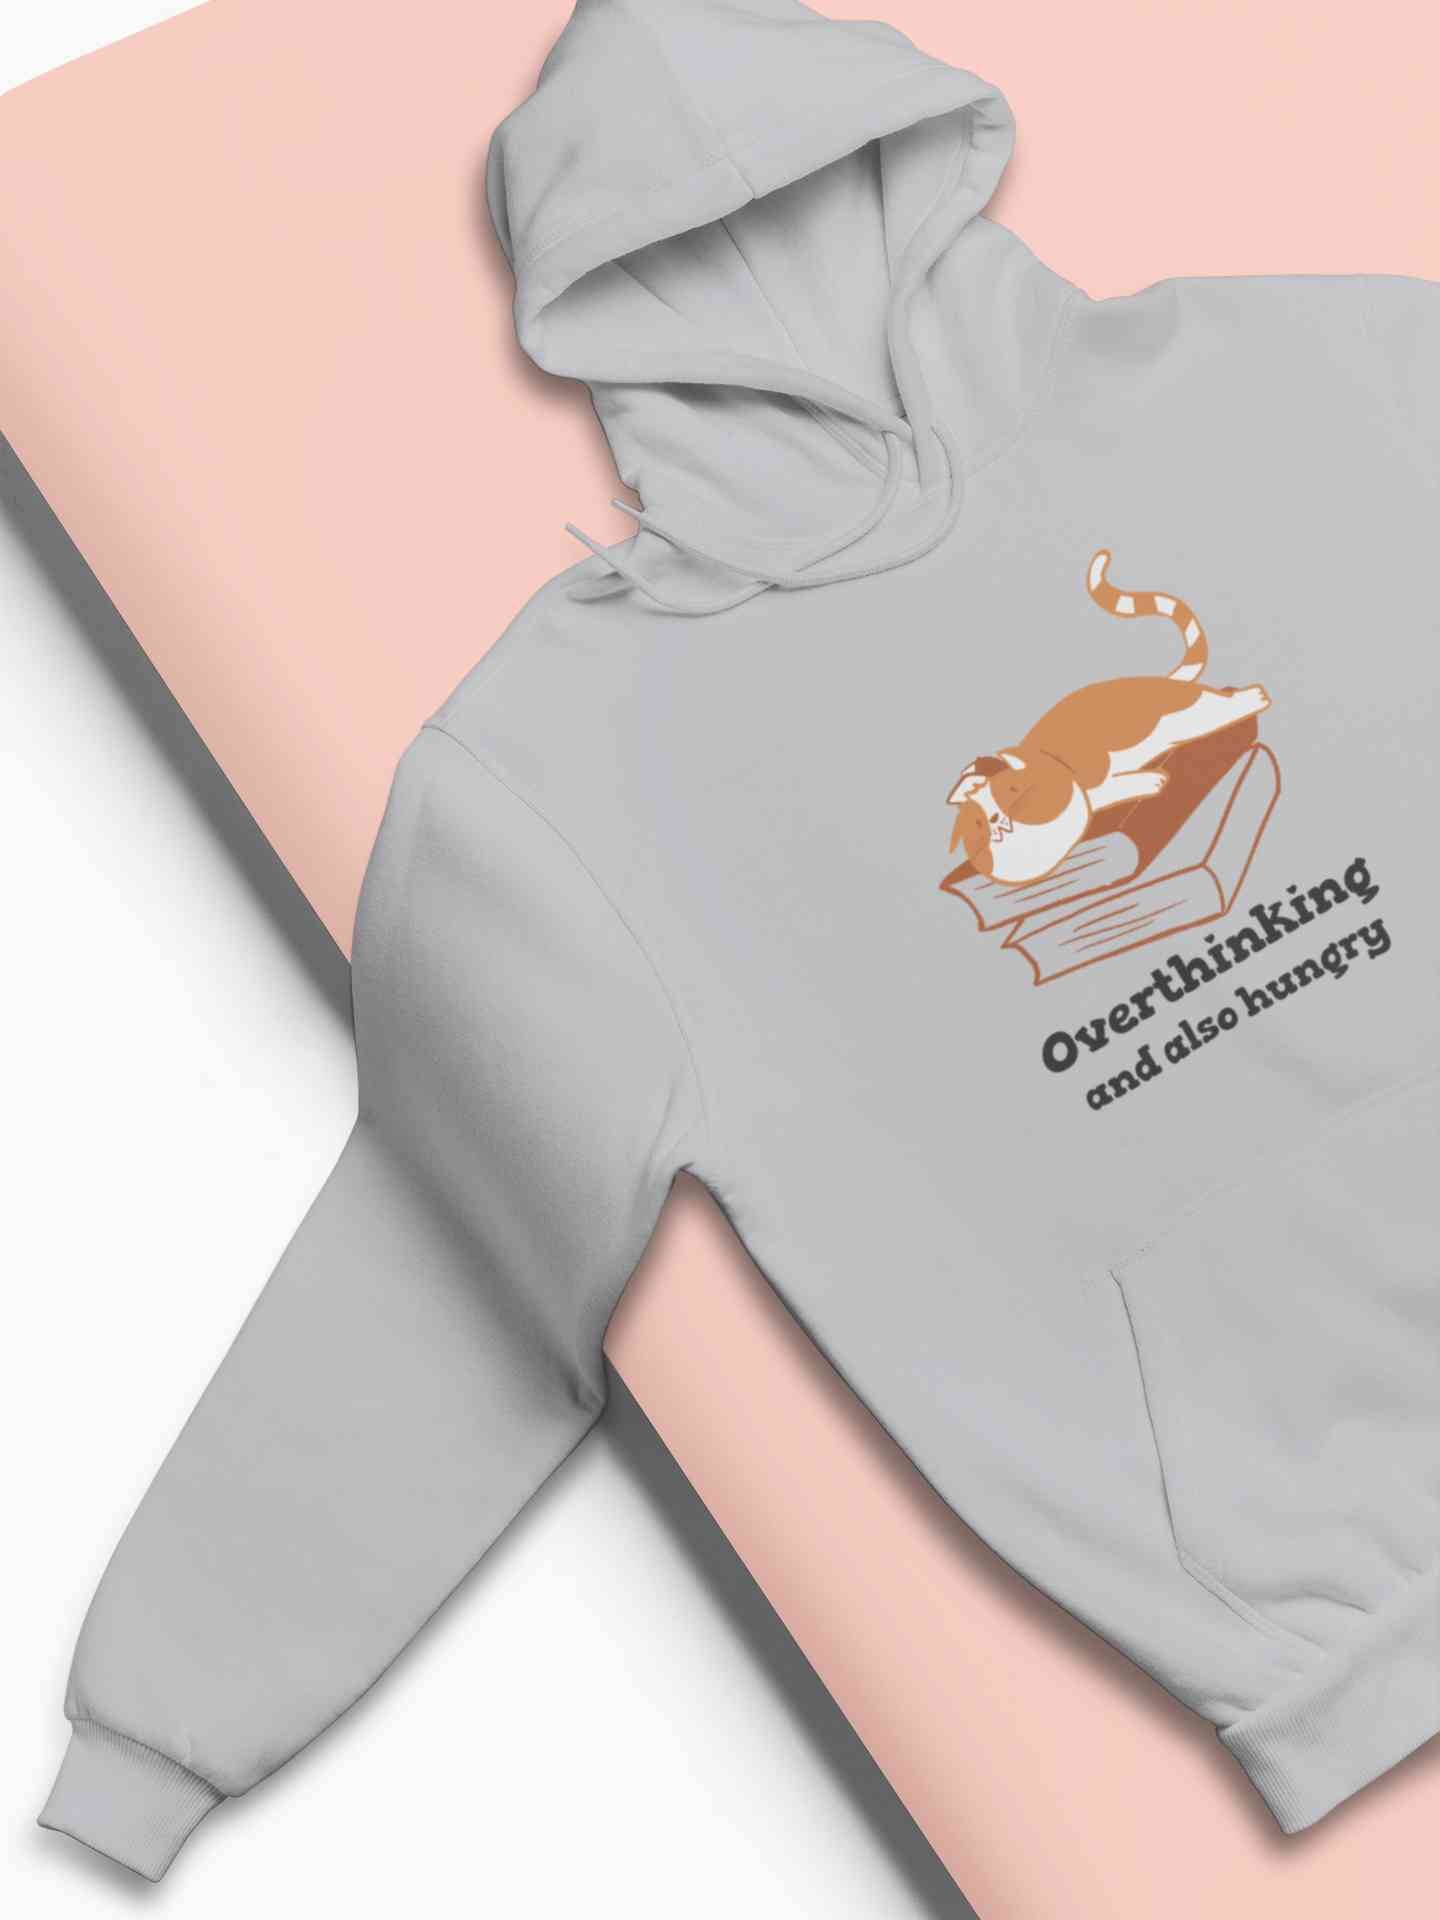 Overthinking And Also Hungry Hoodies for Women-FunkyTeesClub